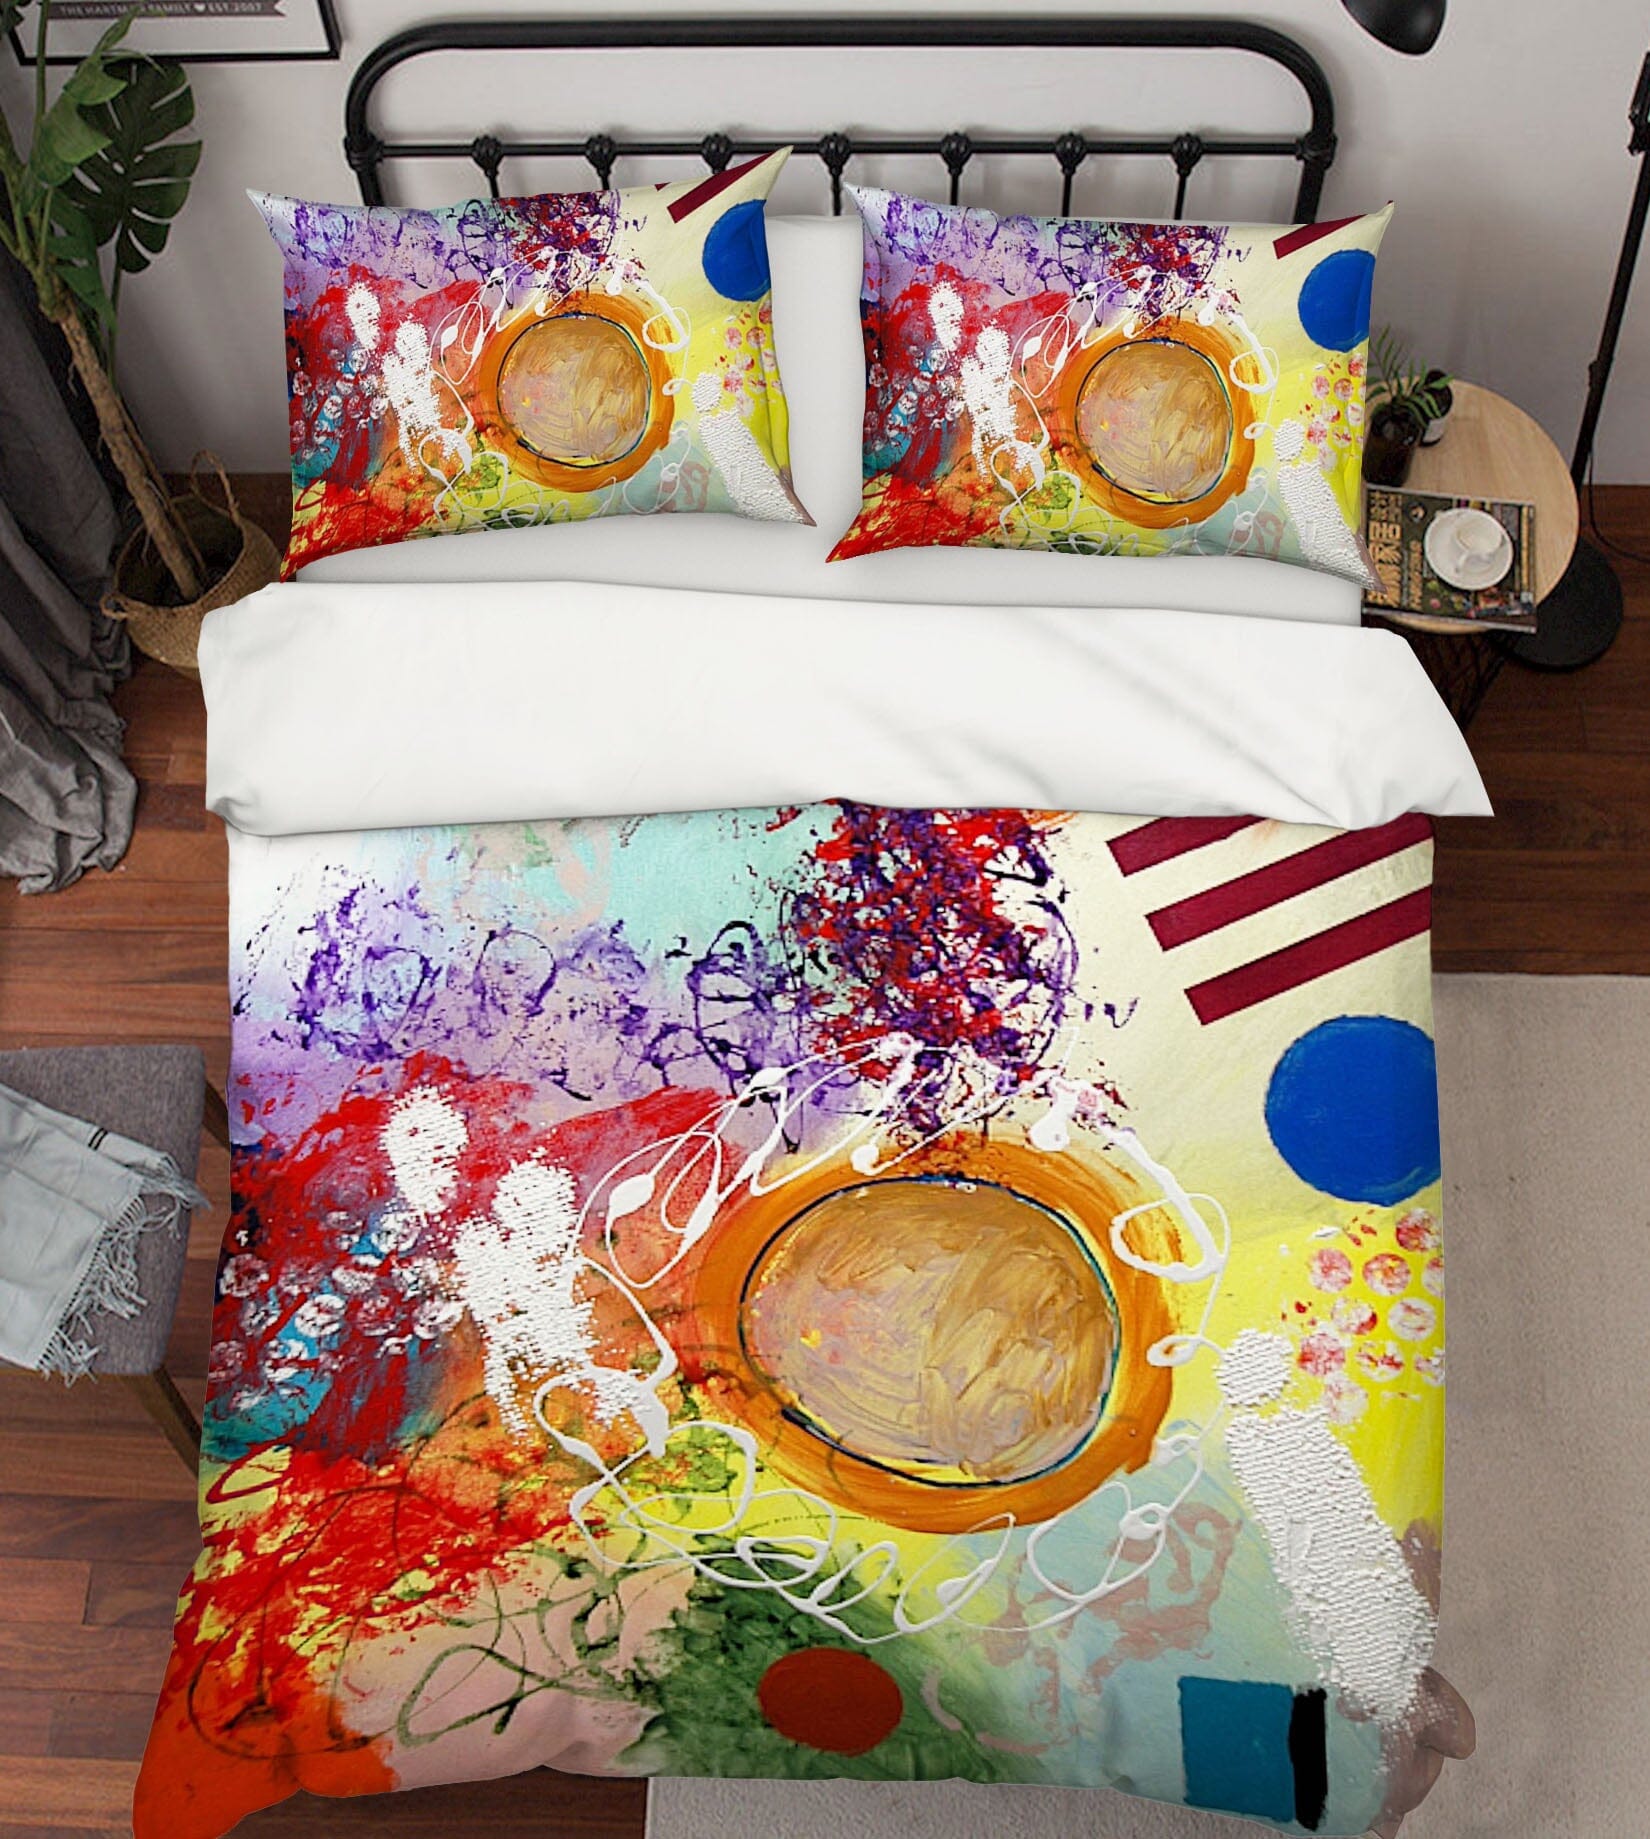 3D Starting Anew 2103 Allan P. Friedlander Bedding Bed Pillowcases Quilt Quiet Covers AJ Creativity Home 